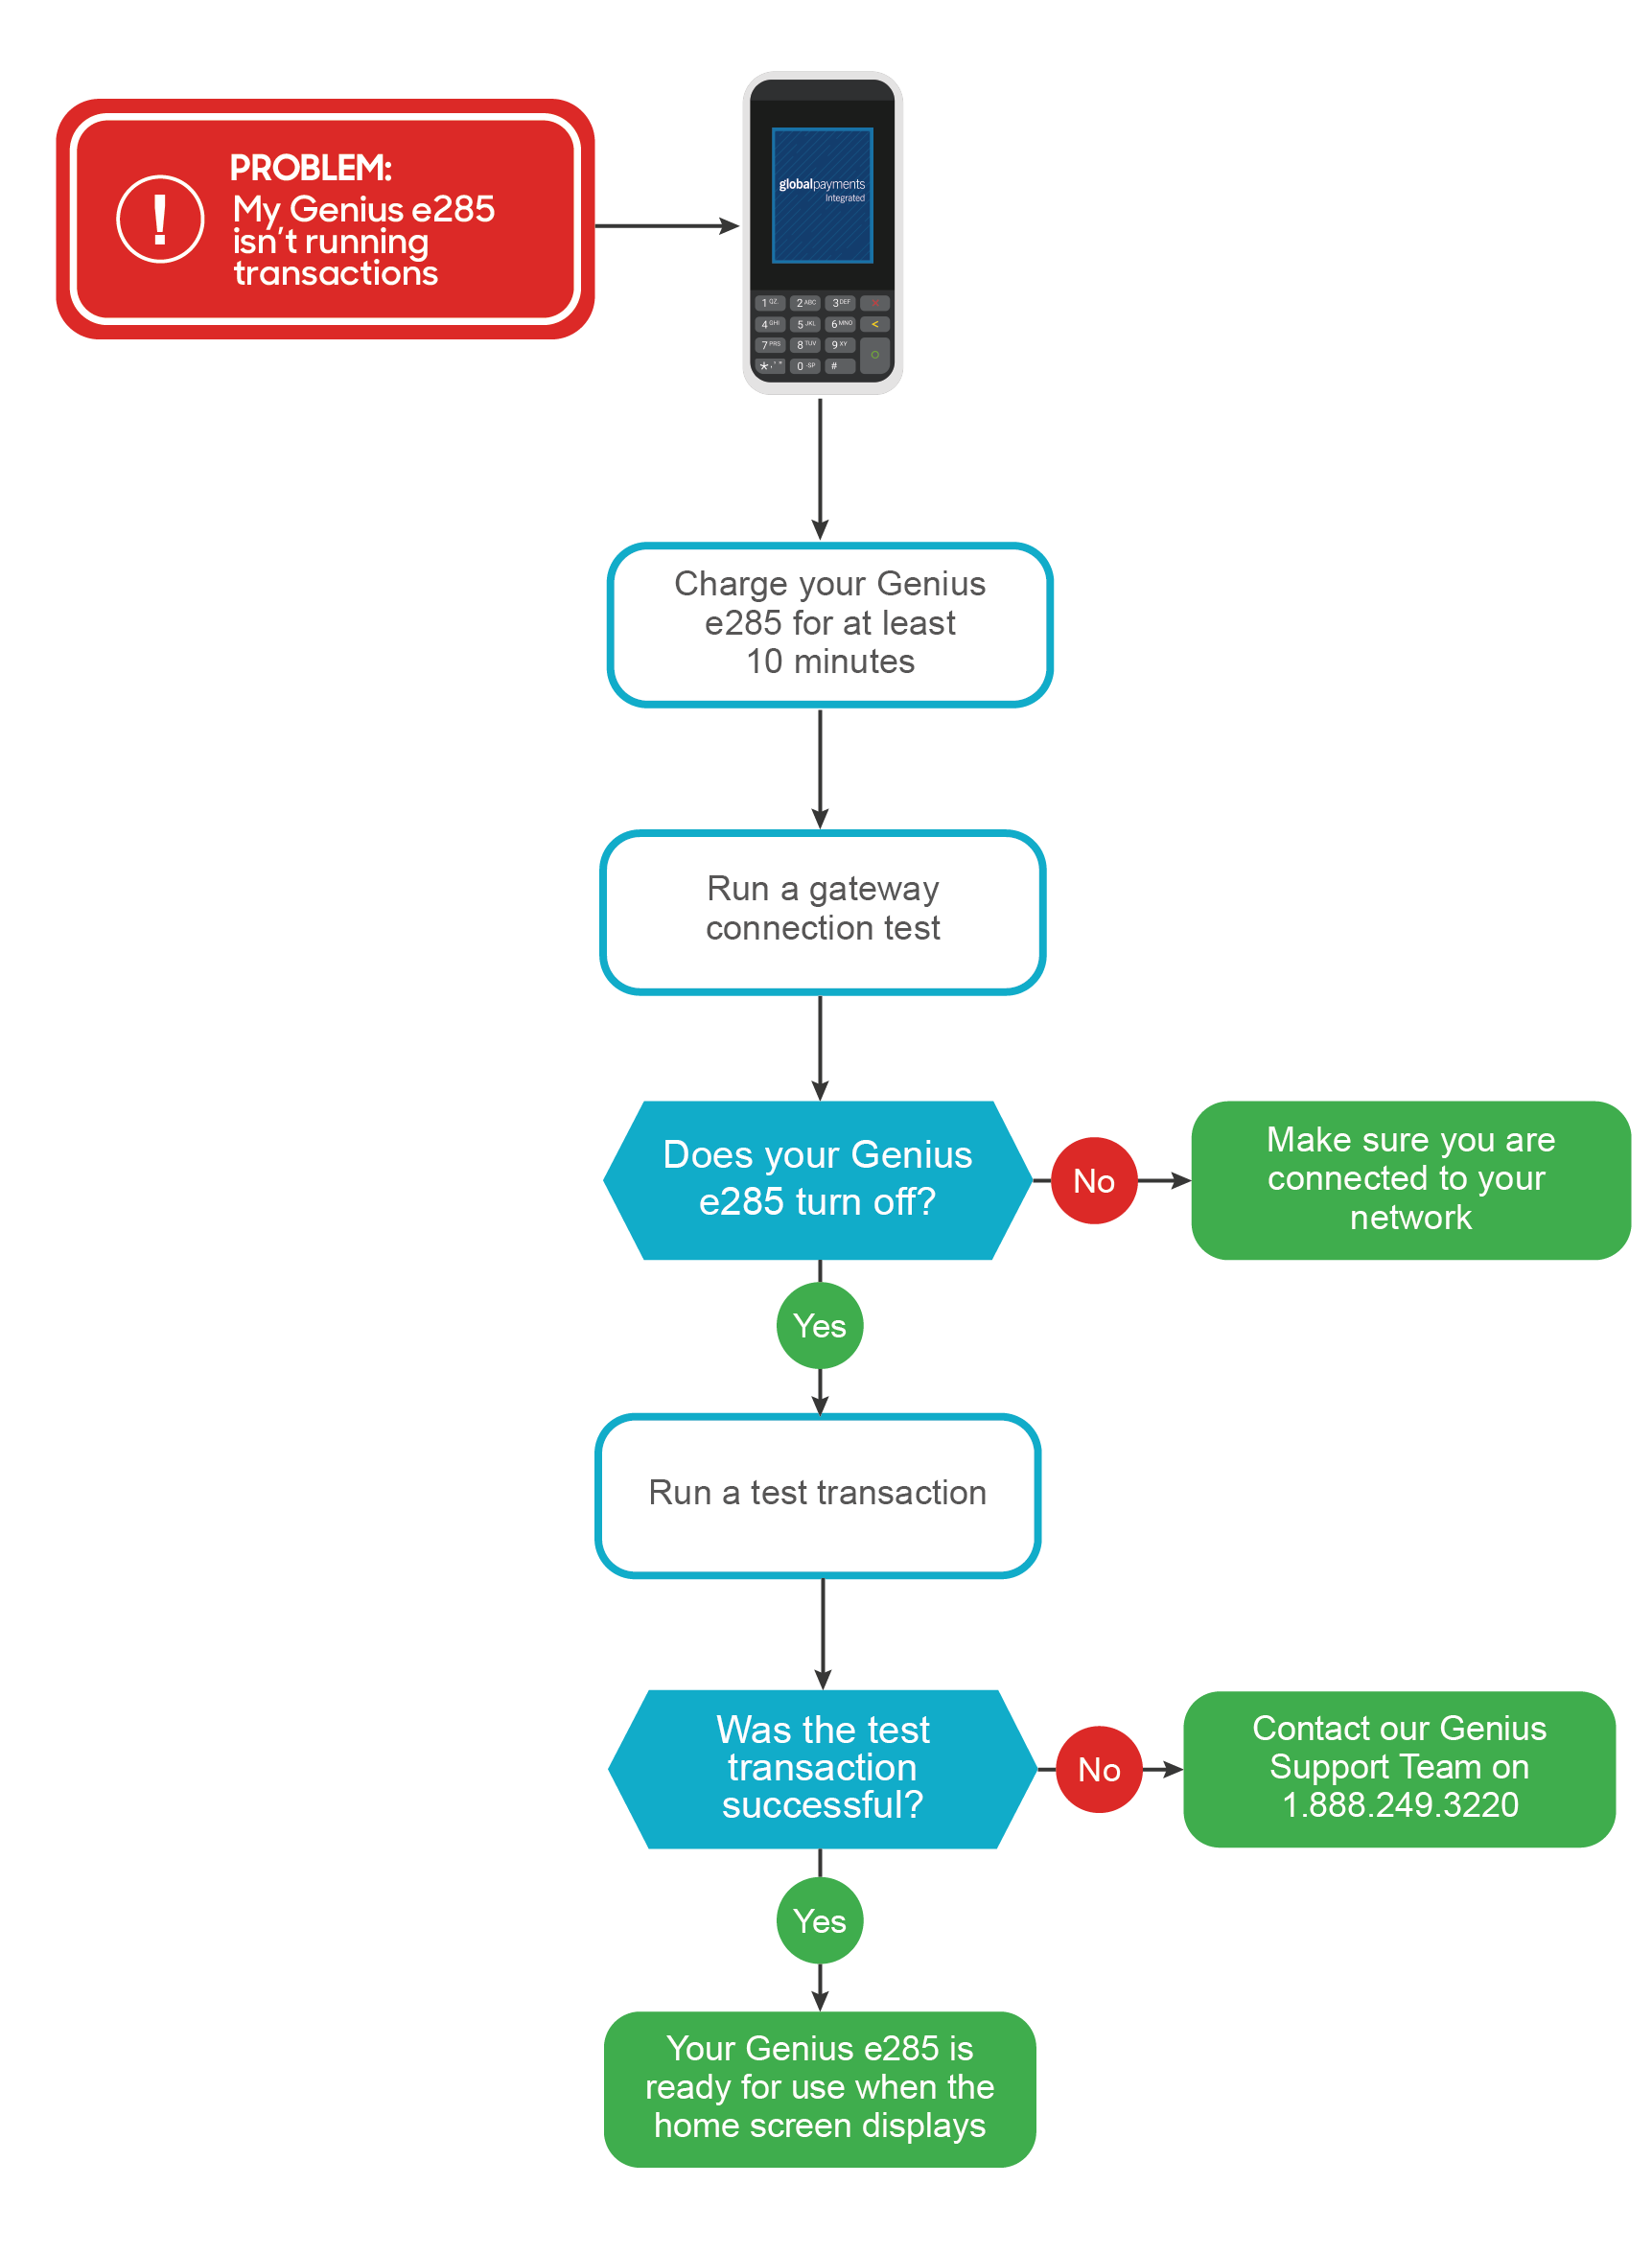 Flowchart with steps to fix a Genius device if it isnt running transactions.